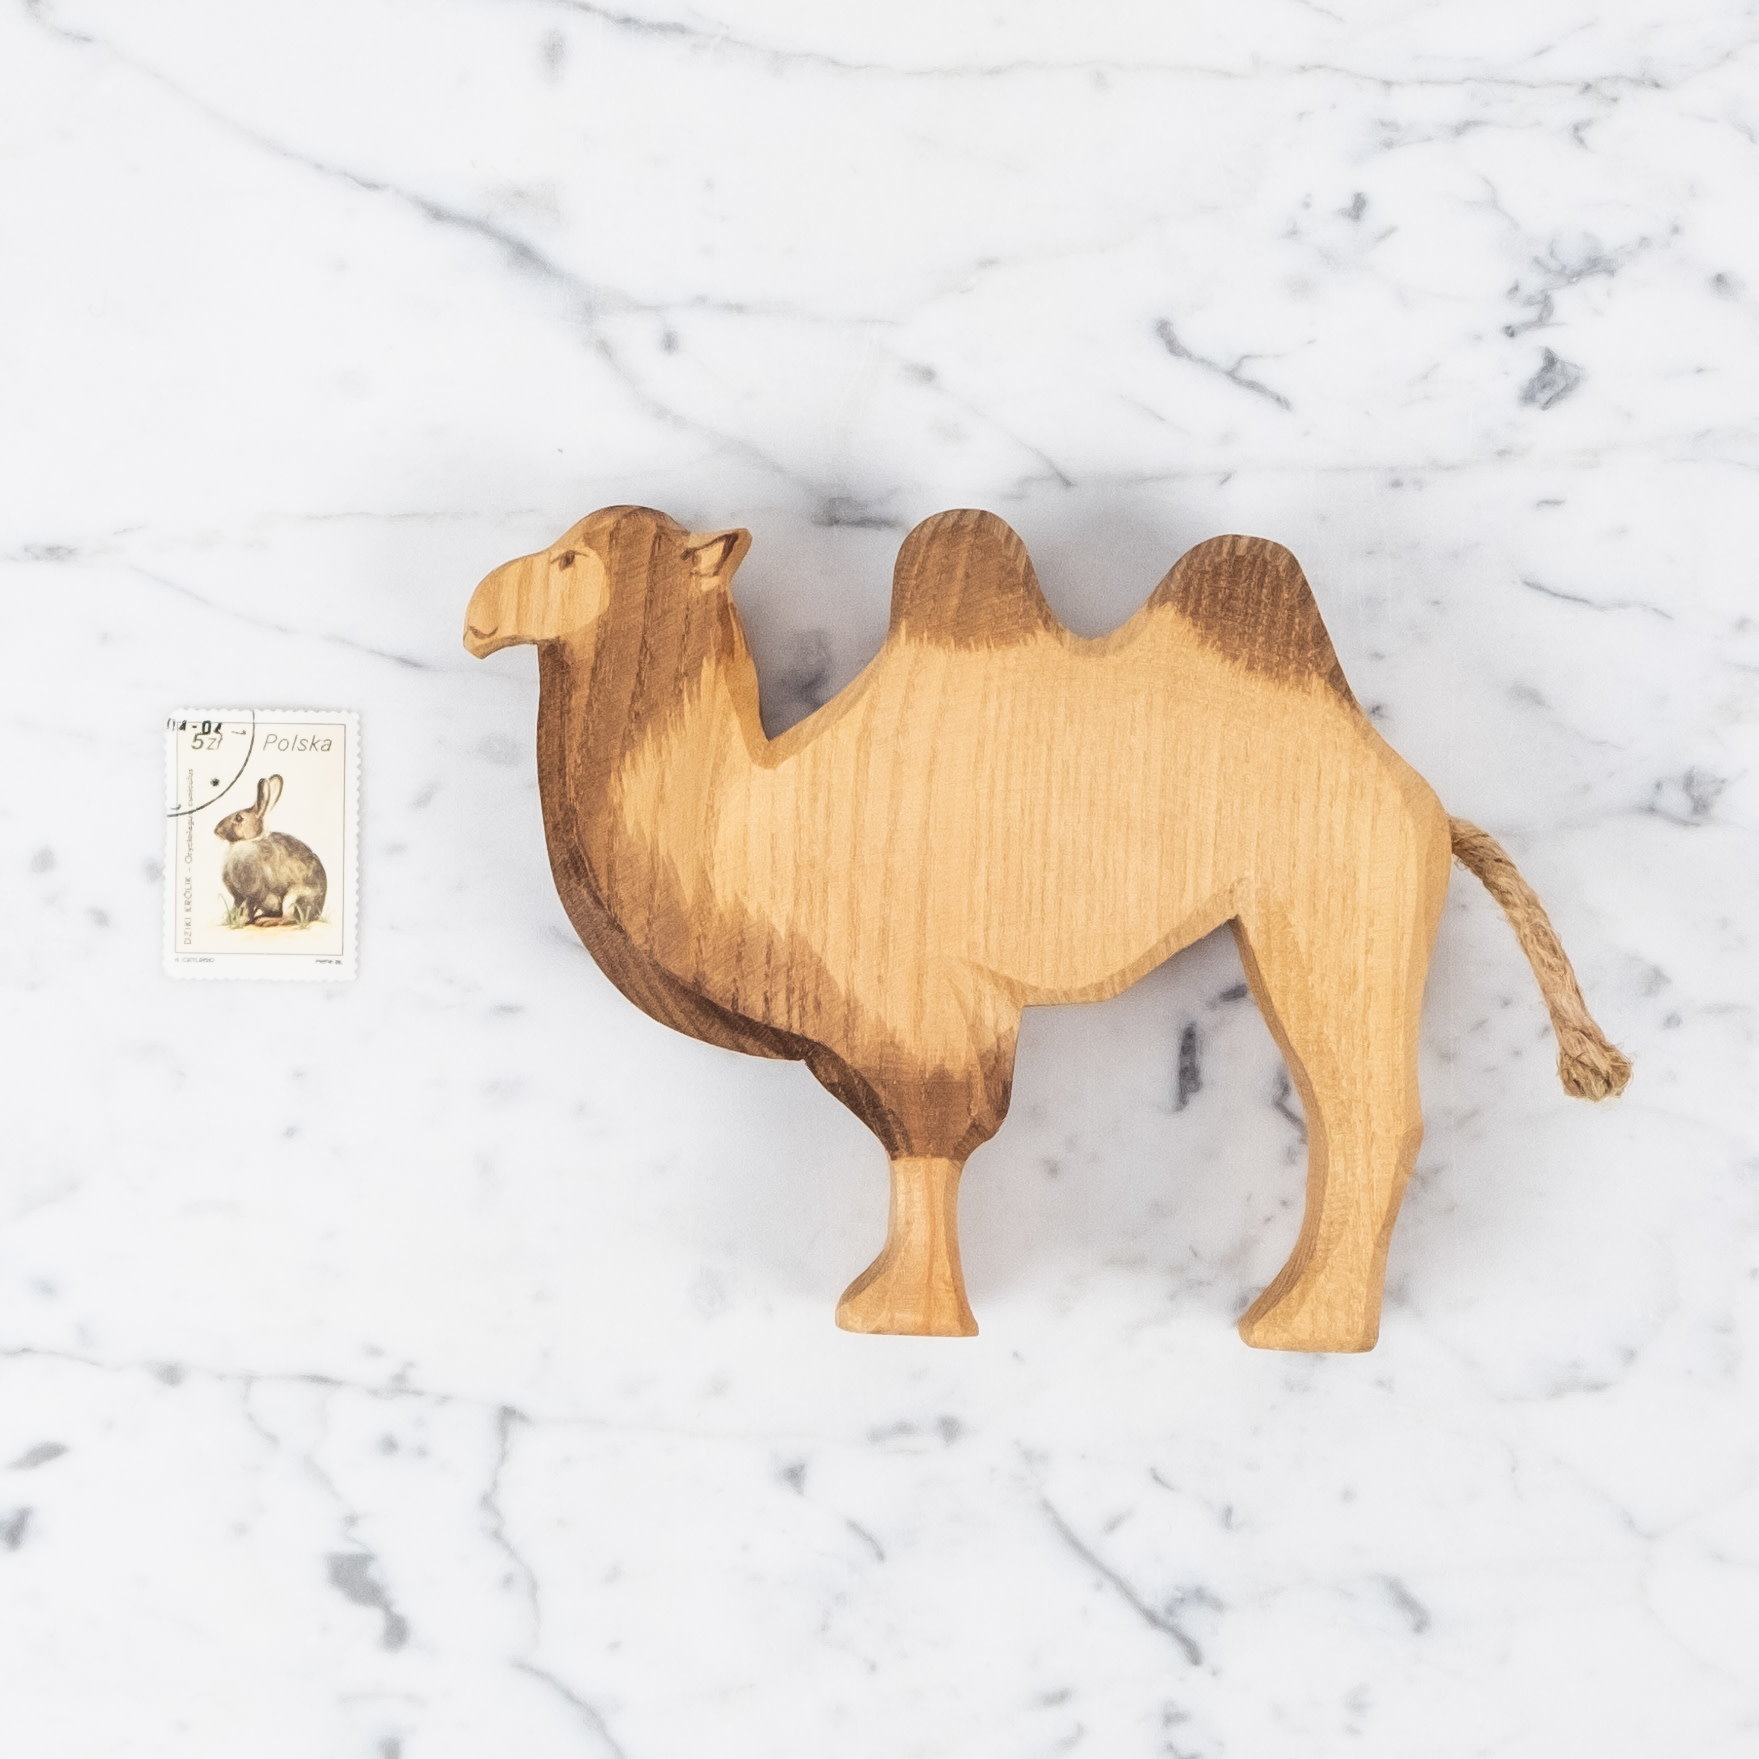 Ostheimer Toys Camel with Two Humps